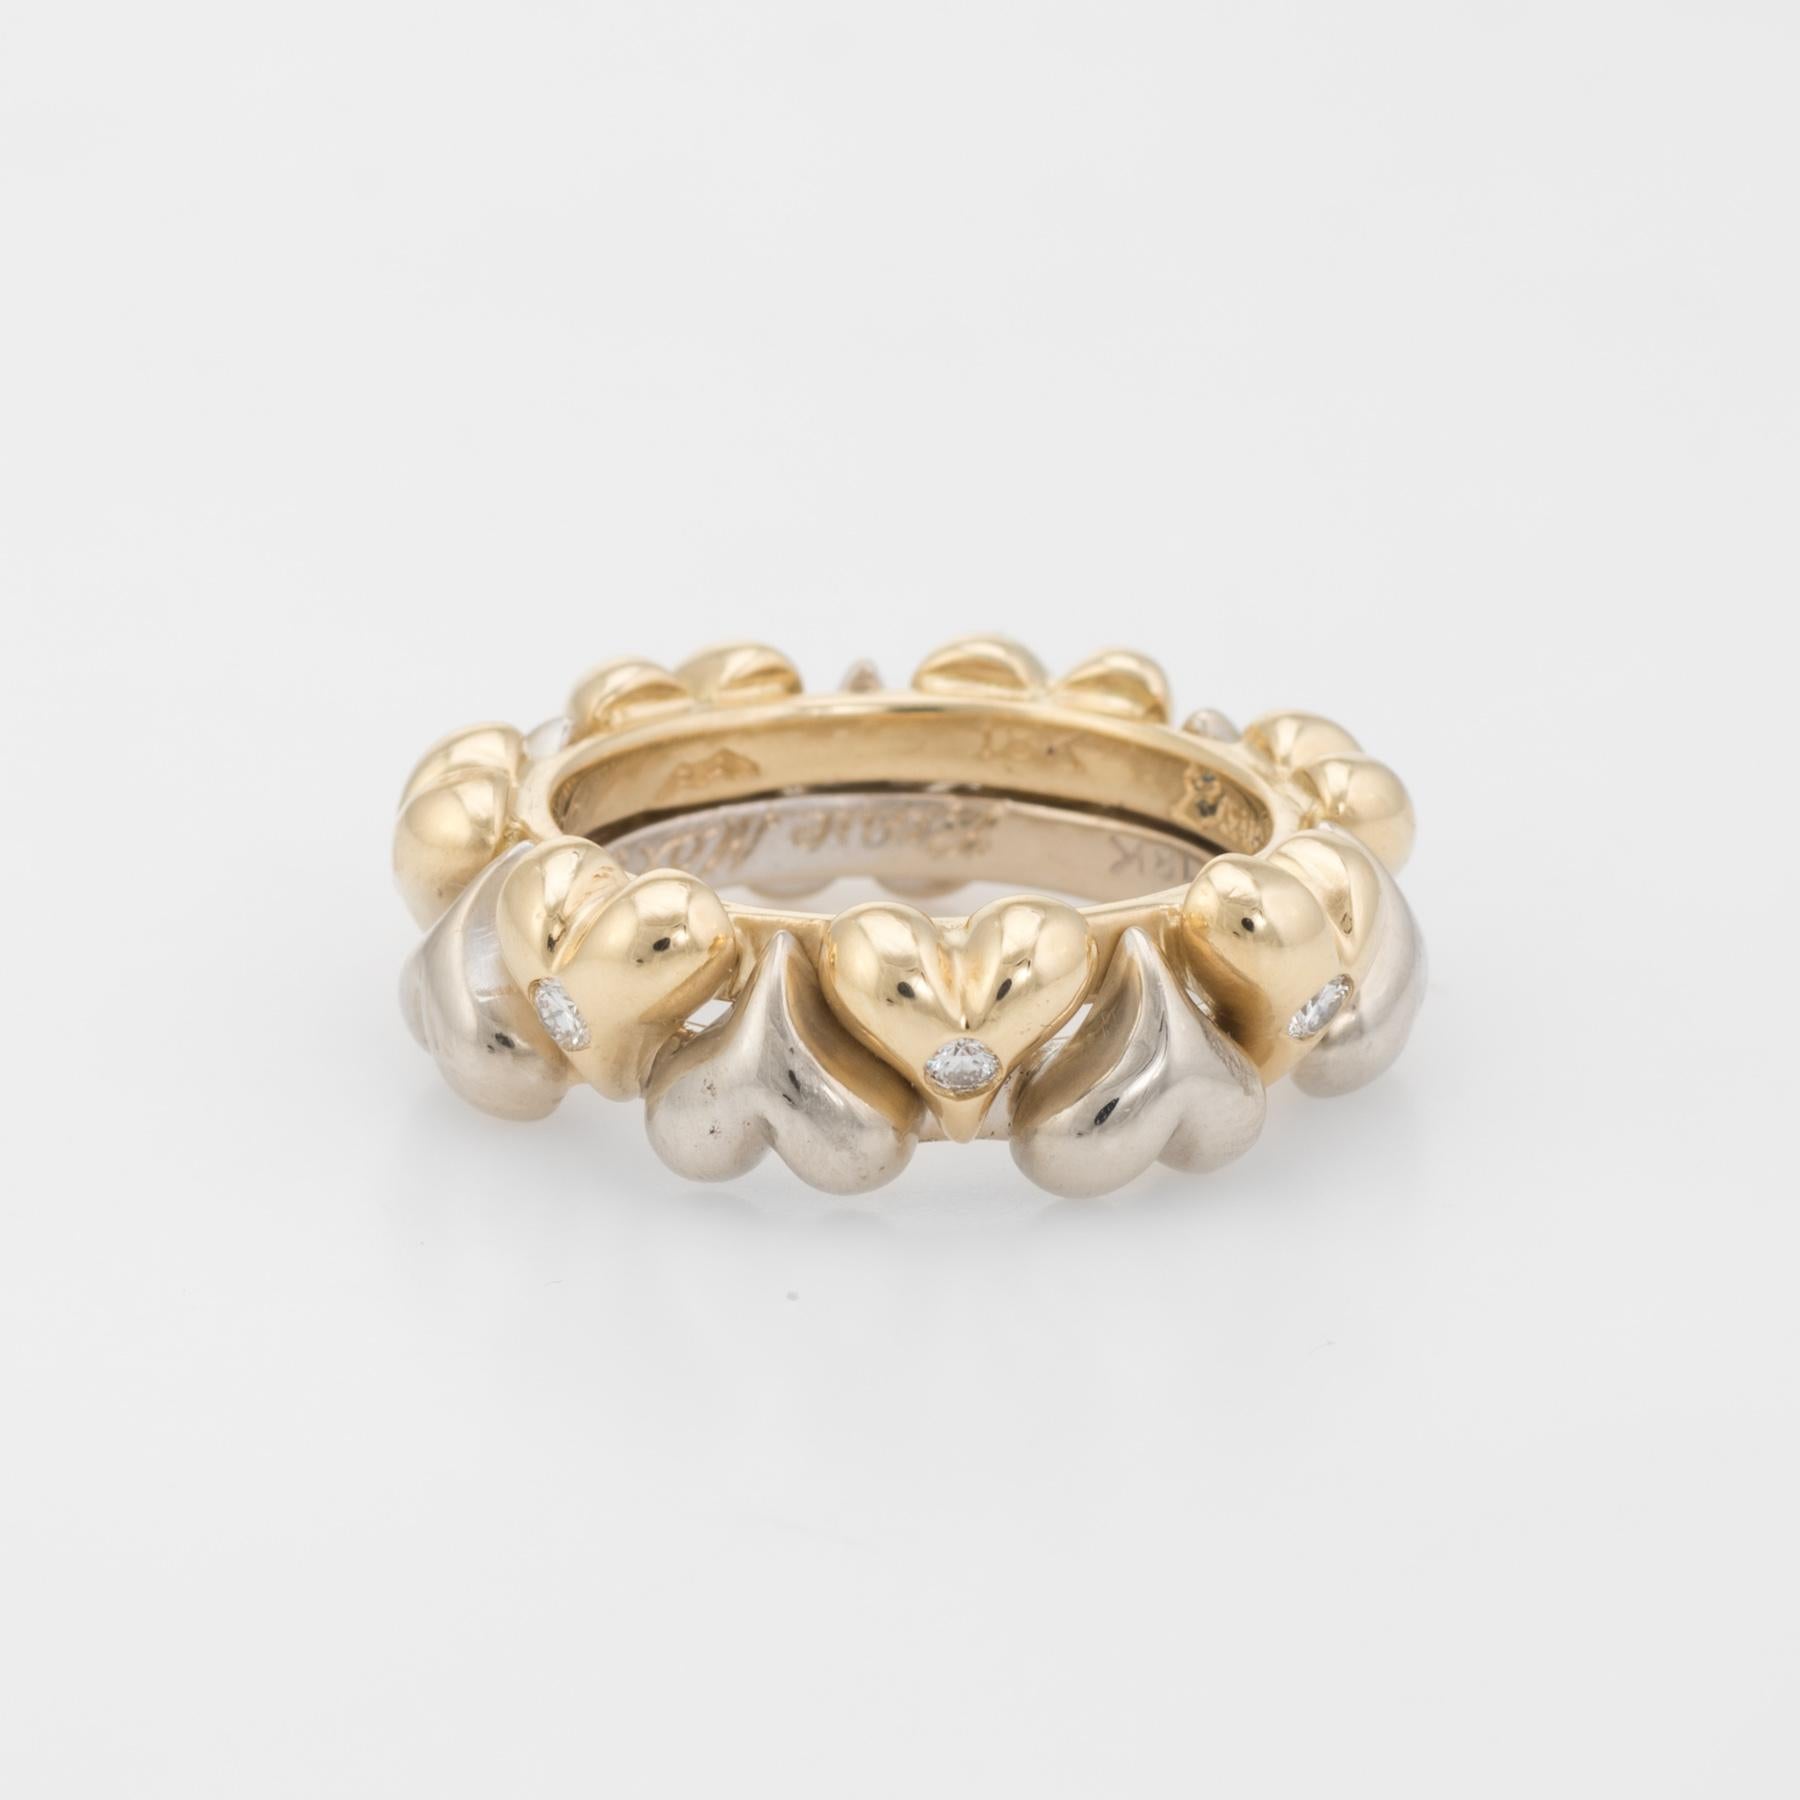 Distinct and unusual vintage hearts eternity ring, crafted in two tone 18 karat yellow & white gold. 

Round brilliant cut diamonds are set into the yellow gold hearts, totaling an estimated 0.07 carats (estimated at H-I color and VS2 clarity).